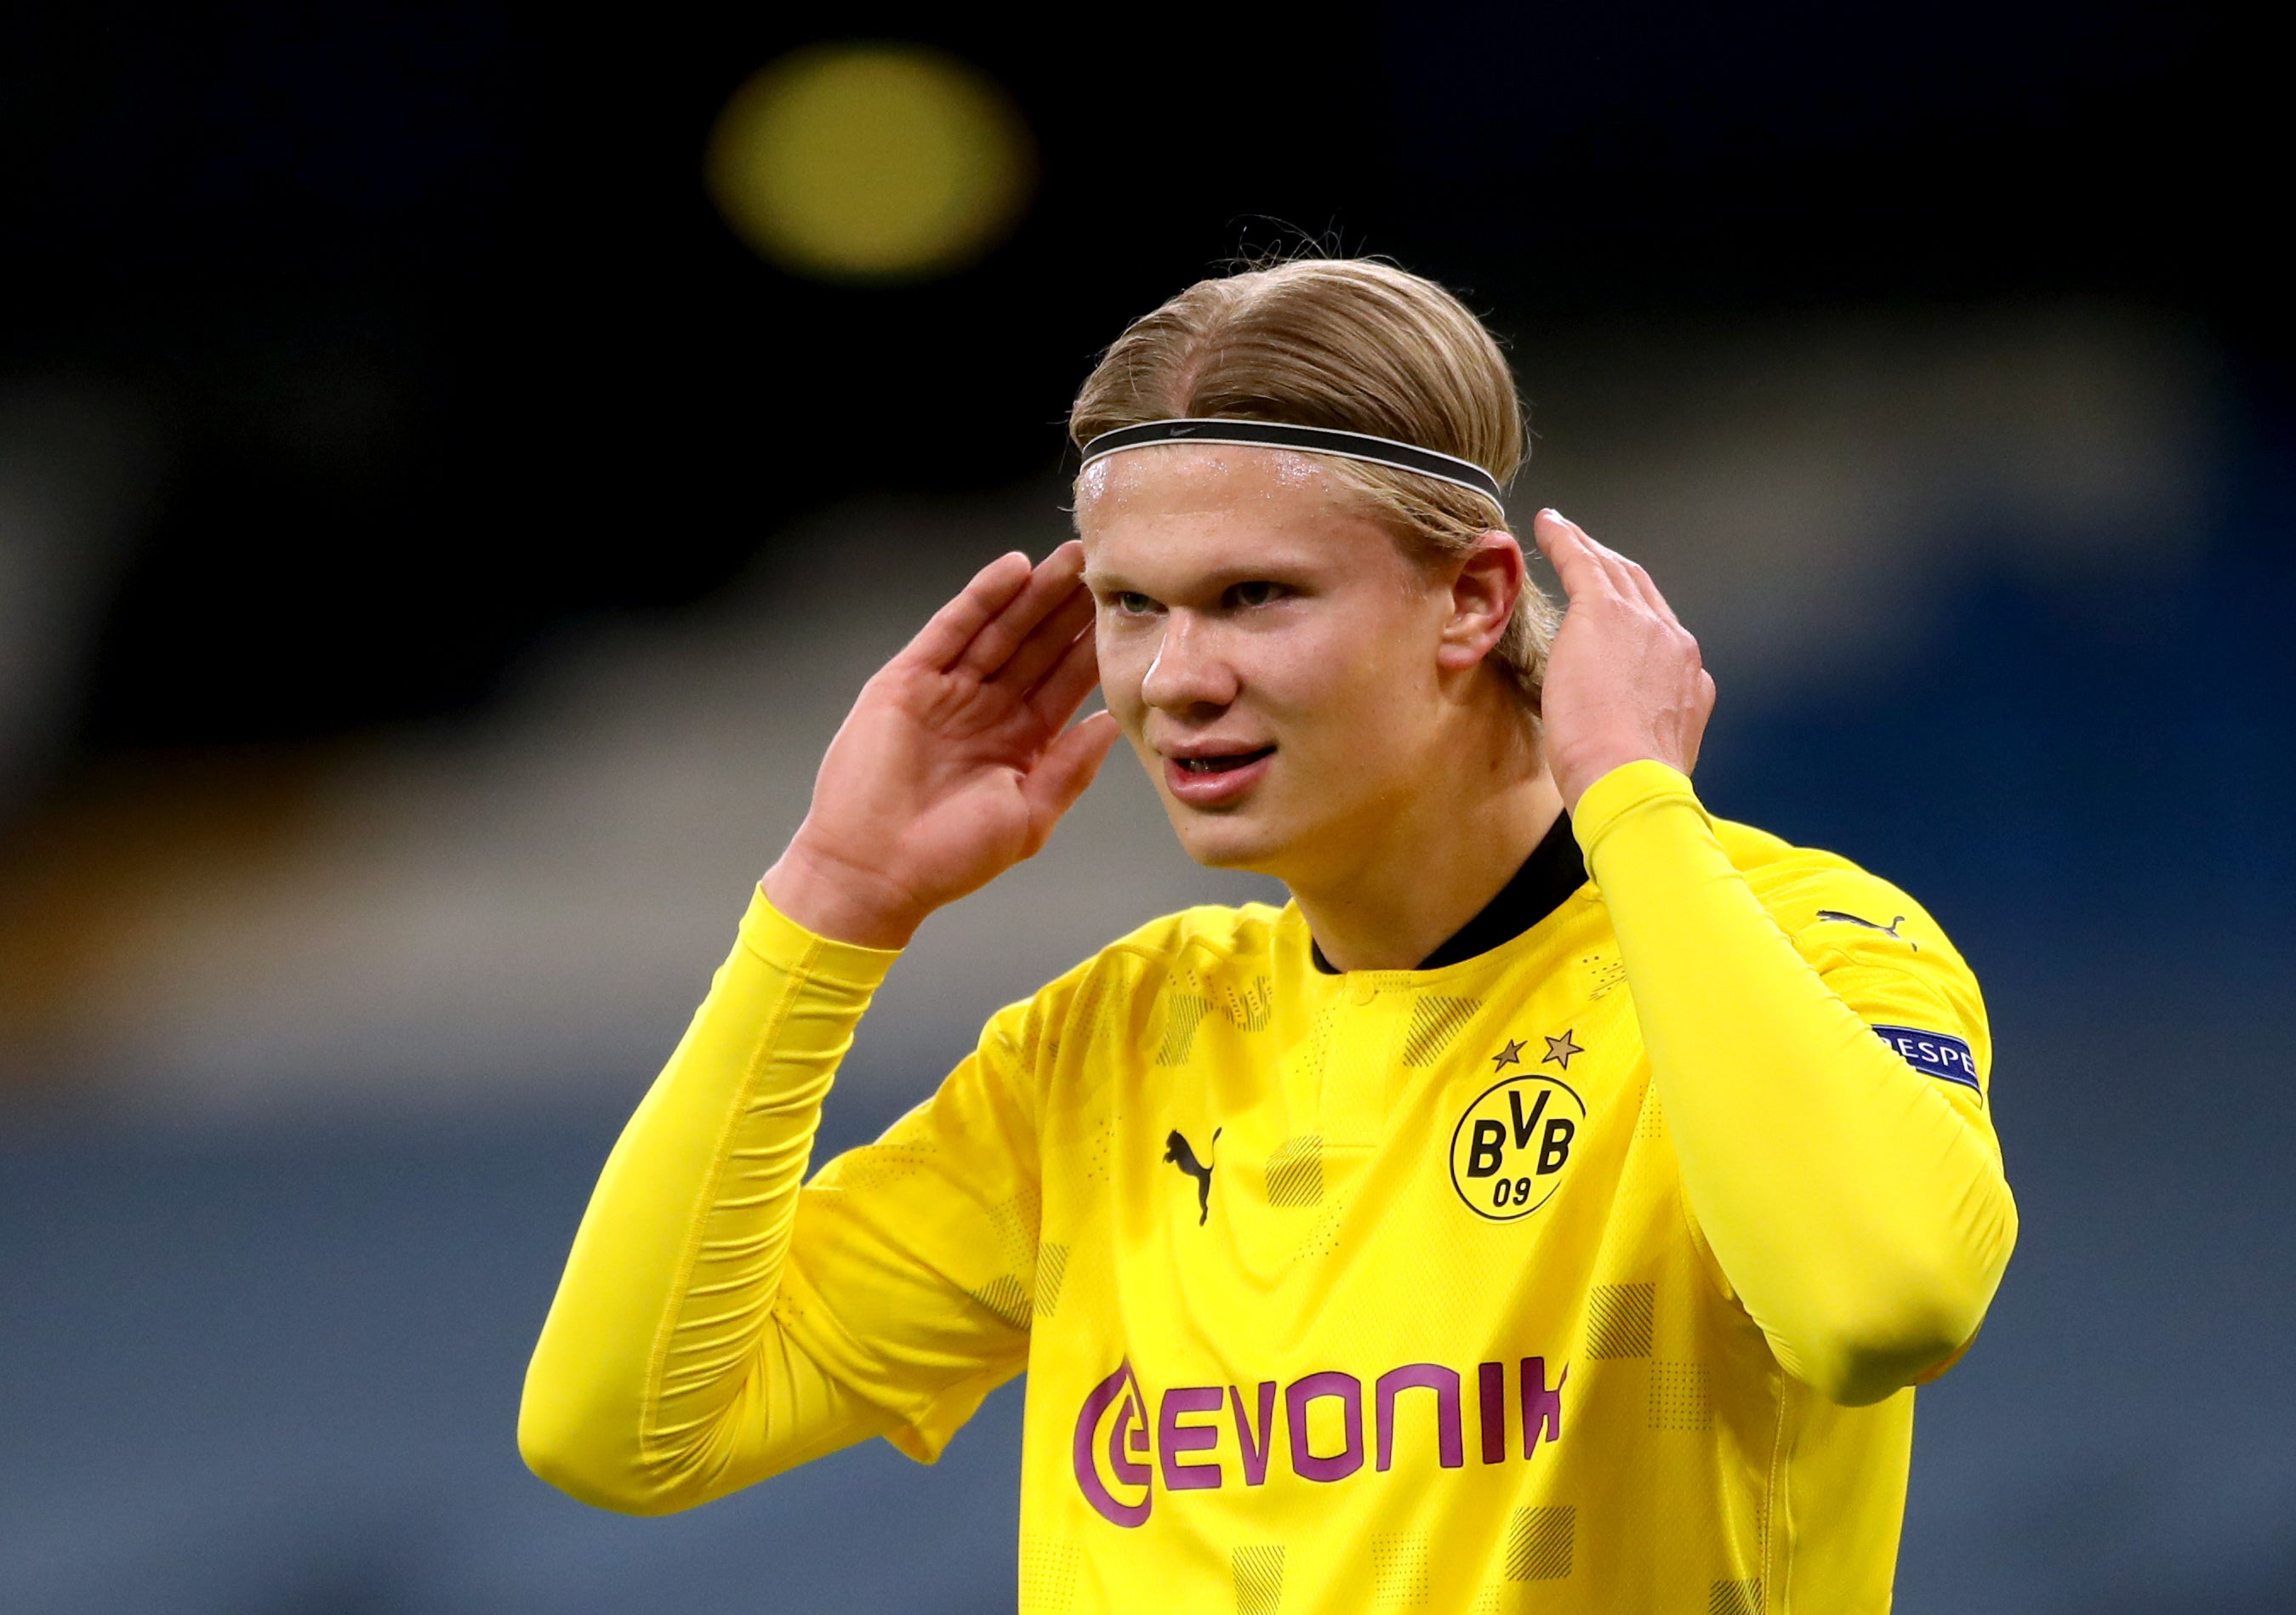 Erling Haaland joined Borussia Dortmund two years ago